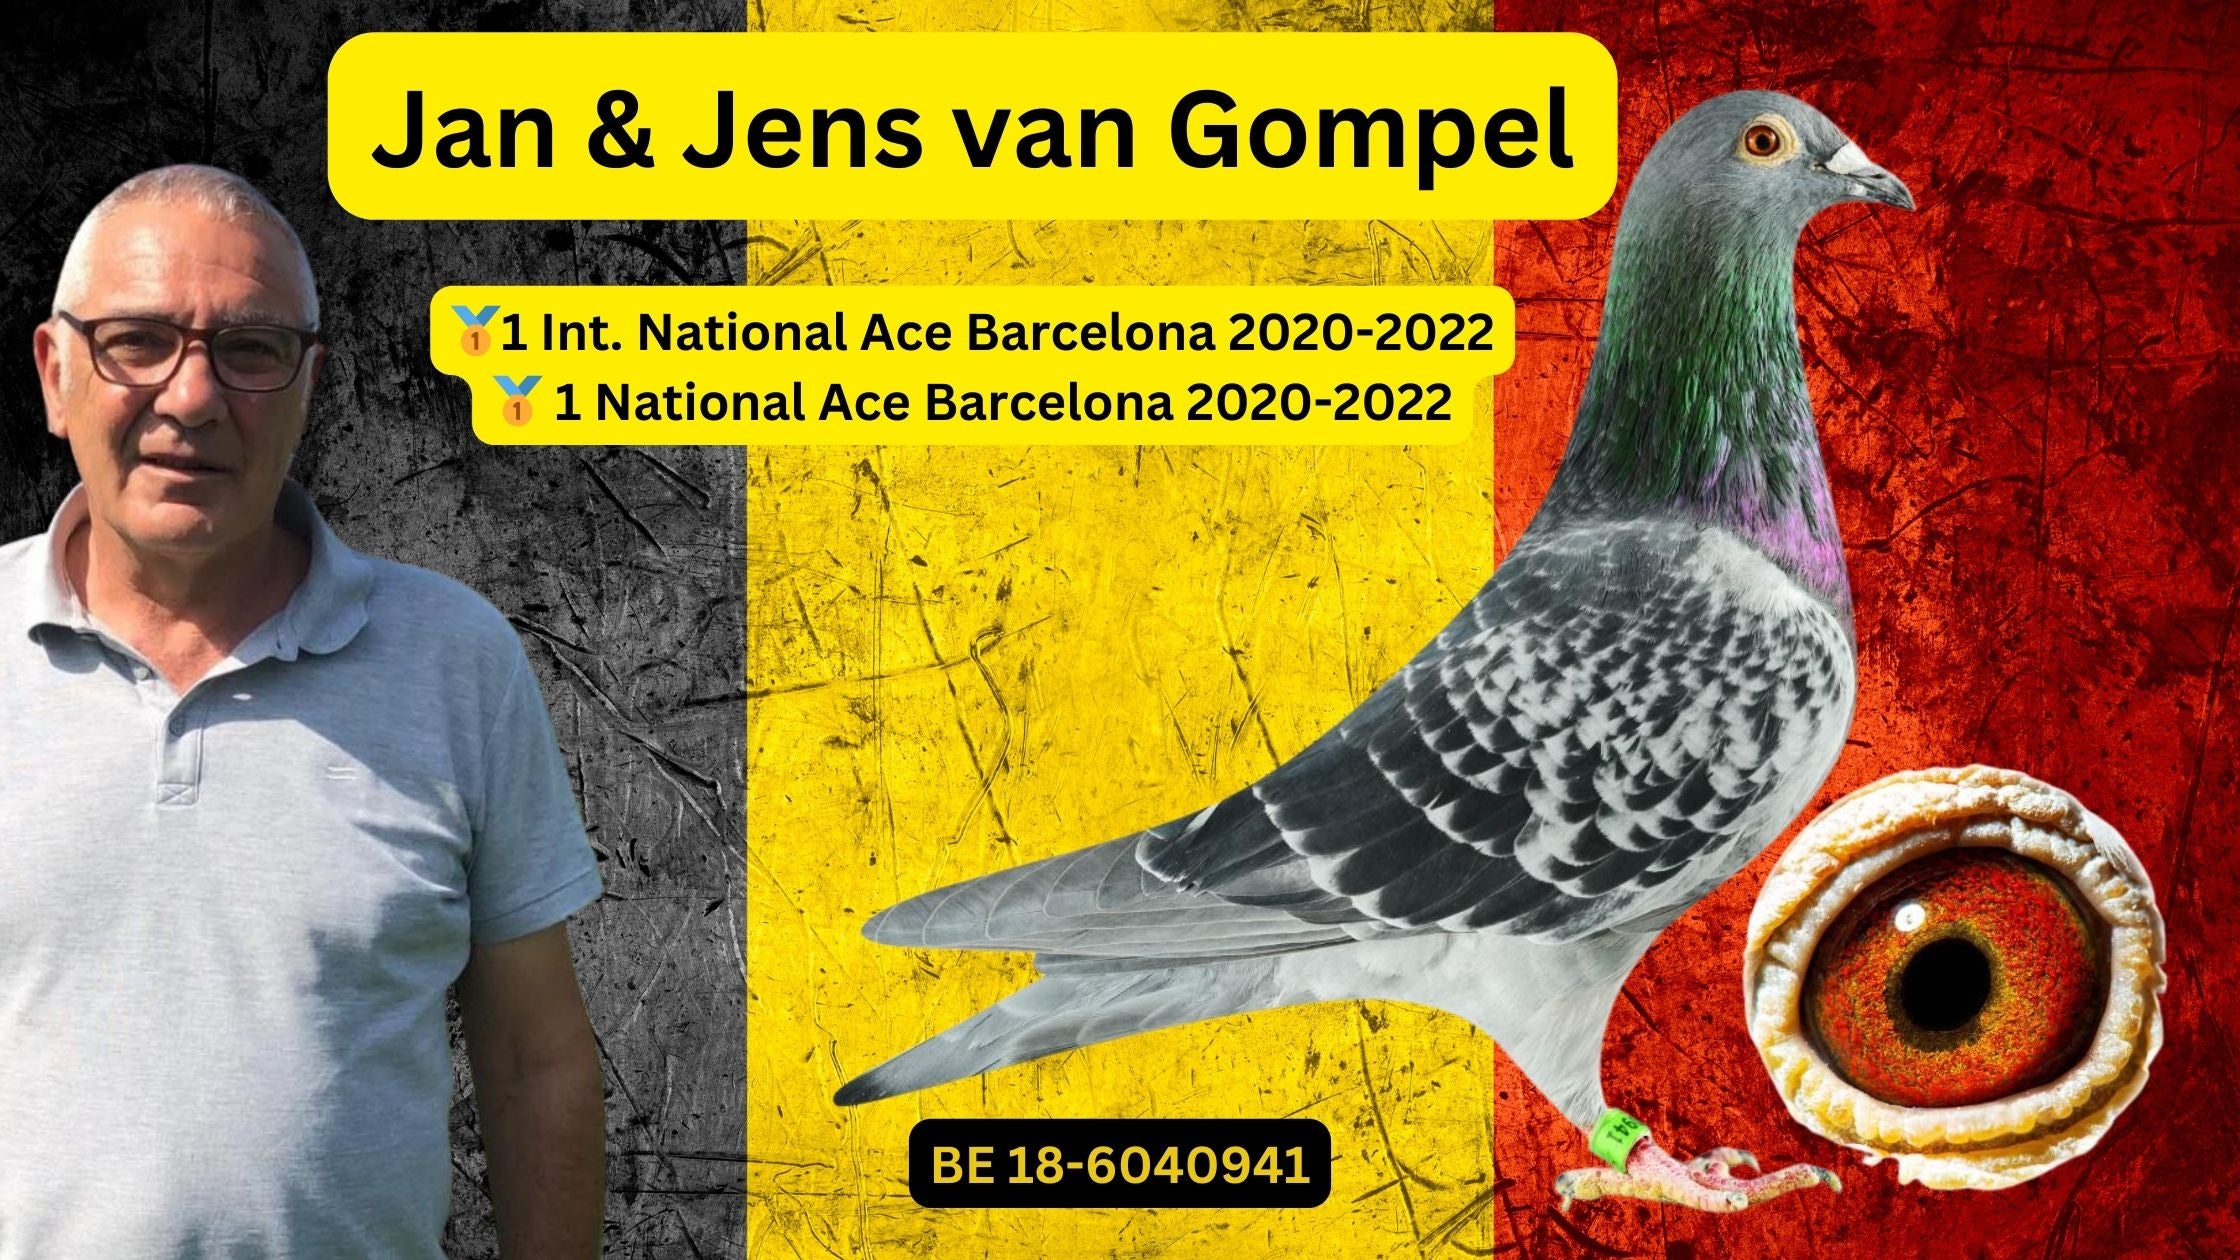 Jan & Jens Van Gompel: the home of the 1 Int. National Ace Barcelona 2020-2022